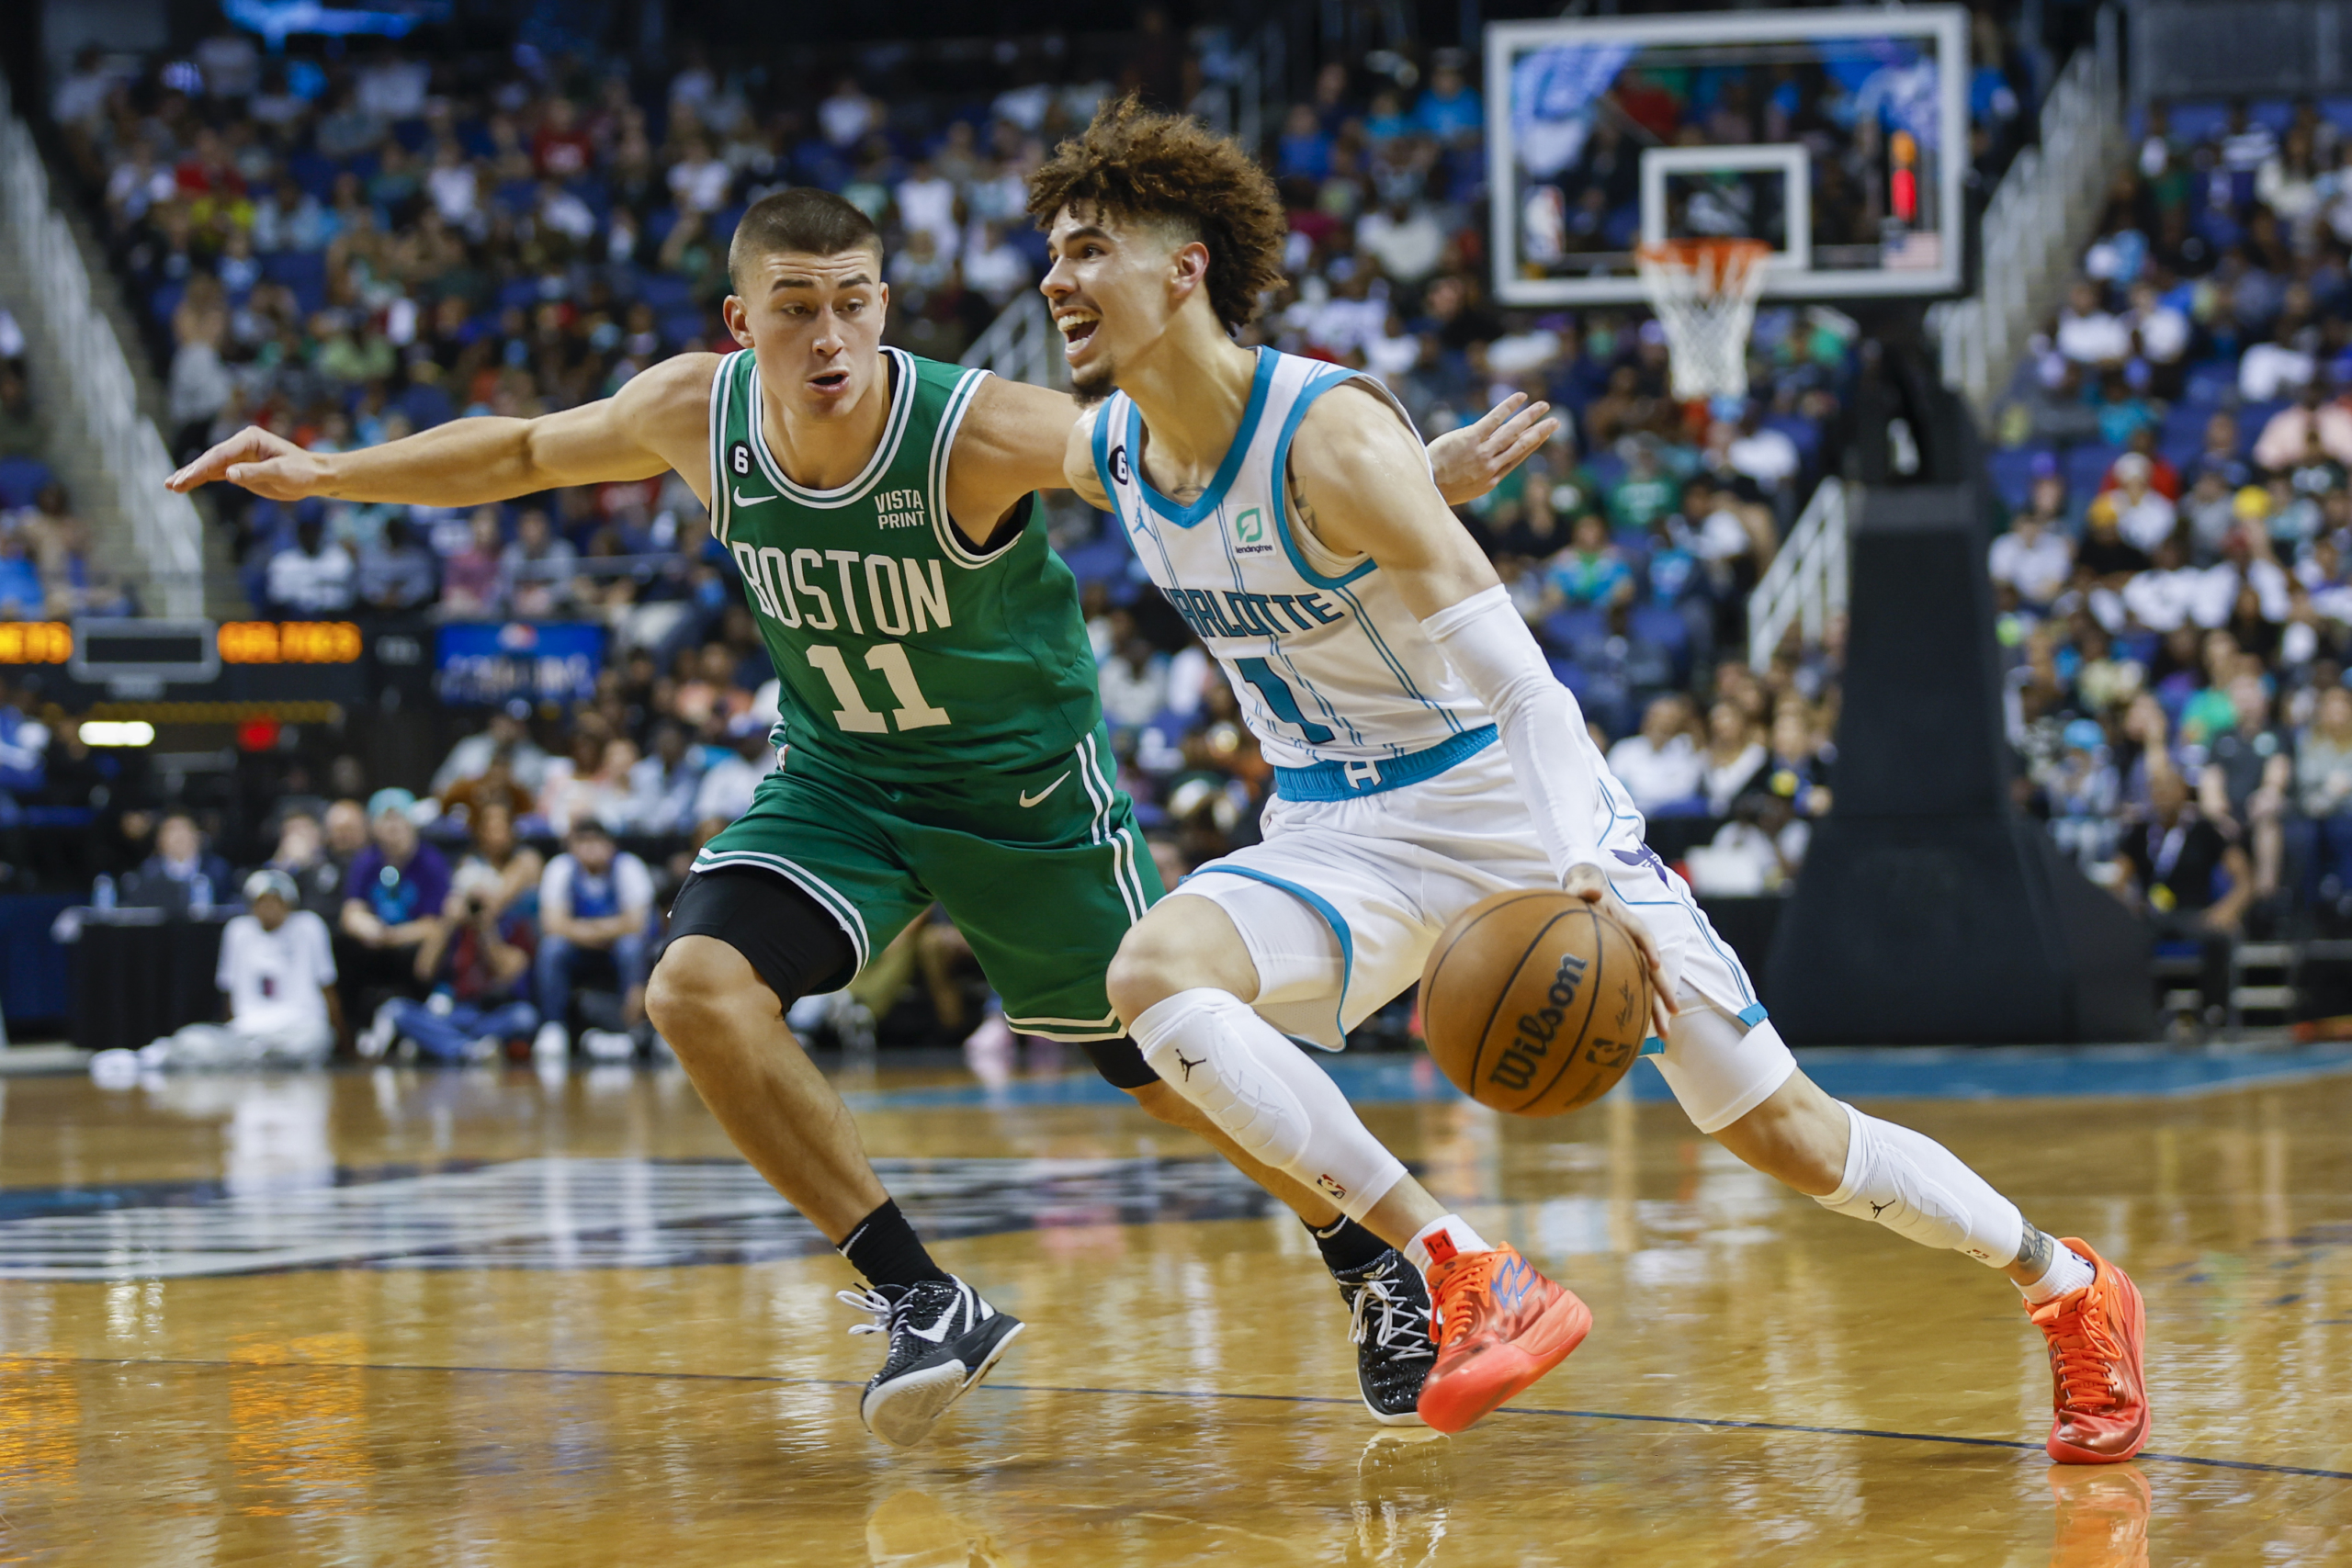 LaMelo Ball Powers a Surging Charlotte Hornets - The New York Times